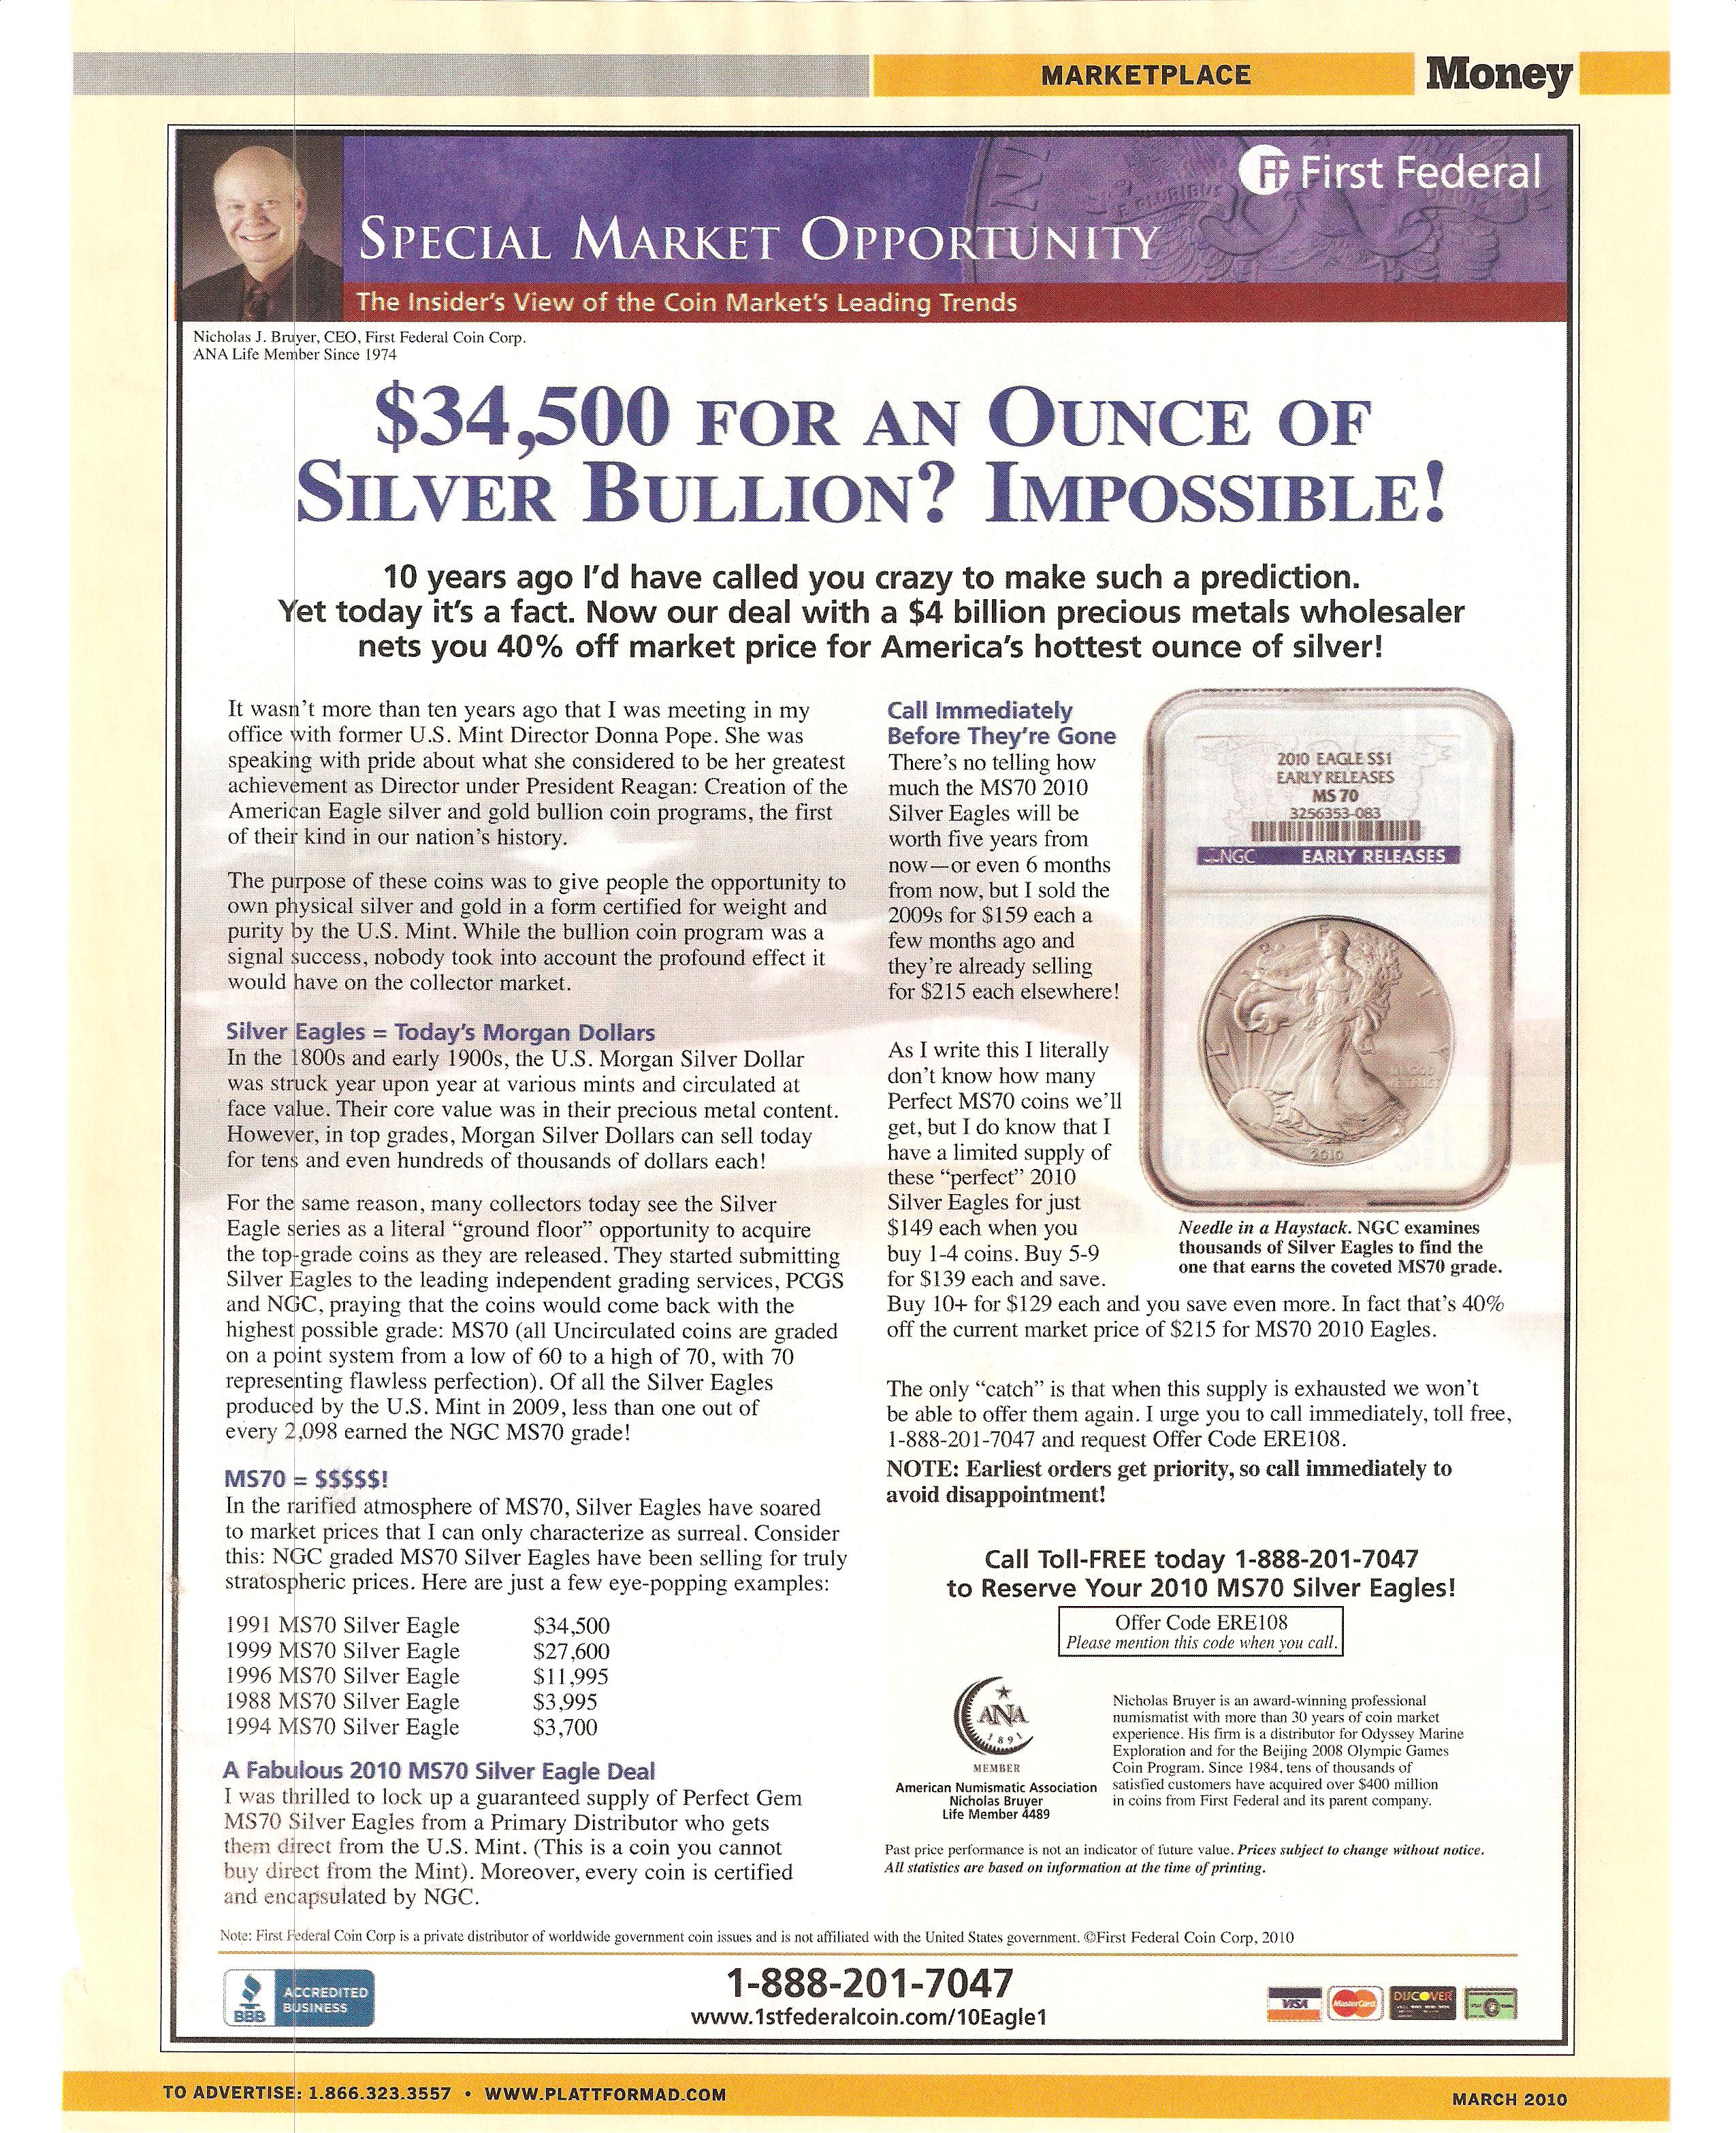 Would You Buy Silver Eagle Dollars For $34,500?